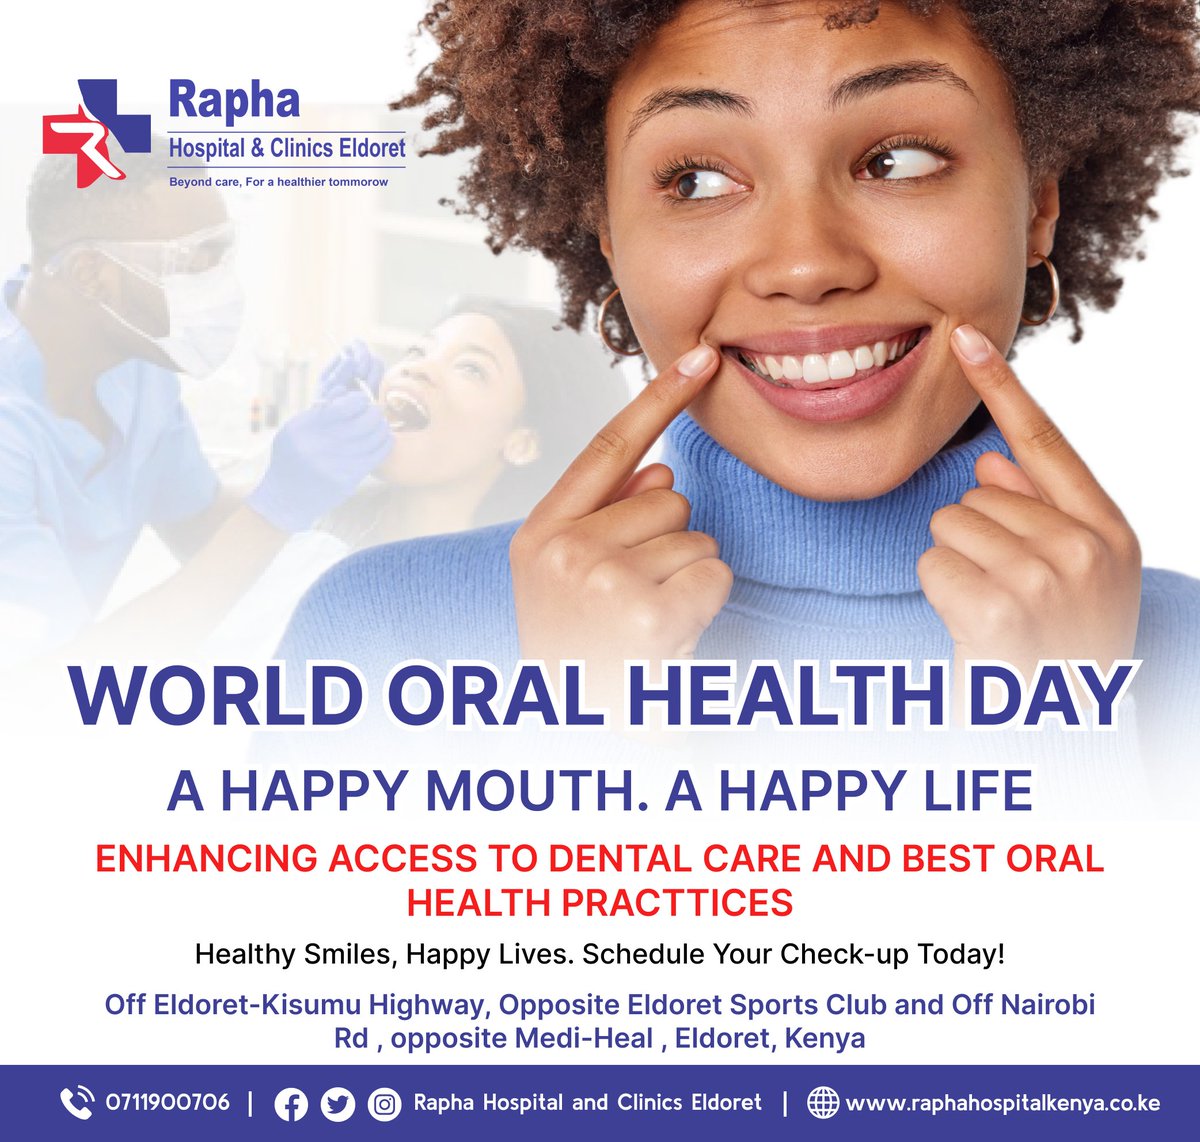 Celebrate World Oral Health Day with @RaphaEldoret!
 Dive into a world where your smile shines brightest, thanks to our enhanced access to top-notch dental care and best oral health practices.  #HappyMouthHappyLife #RaphaCares #OralHealthDay